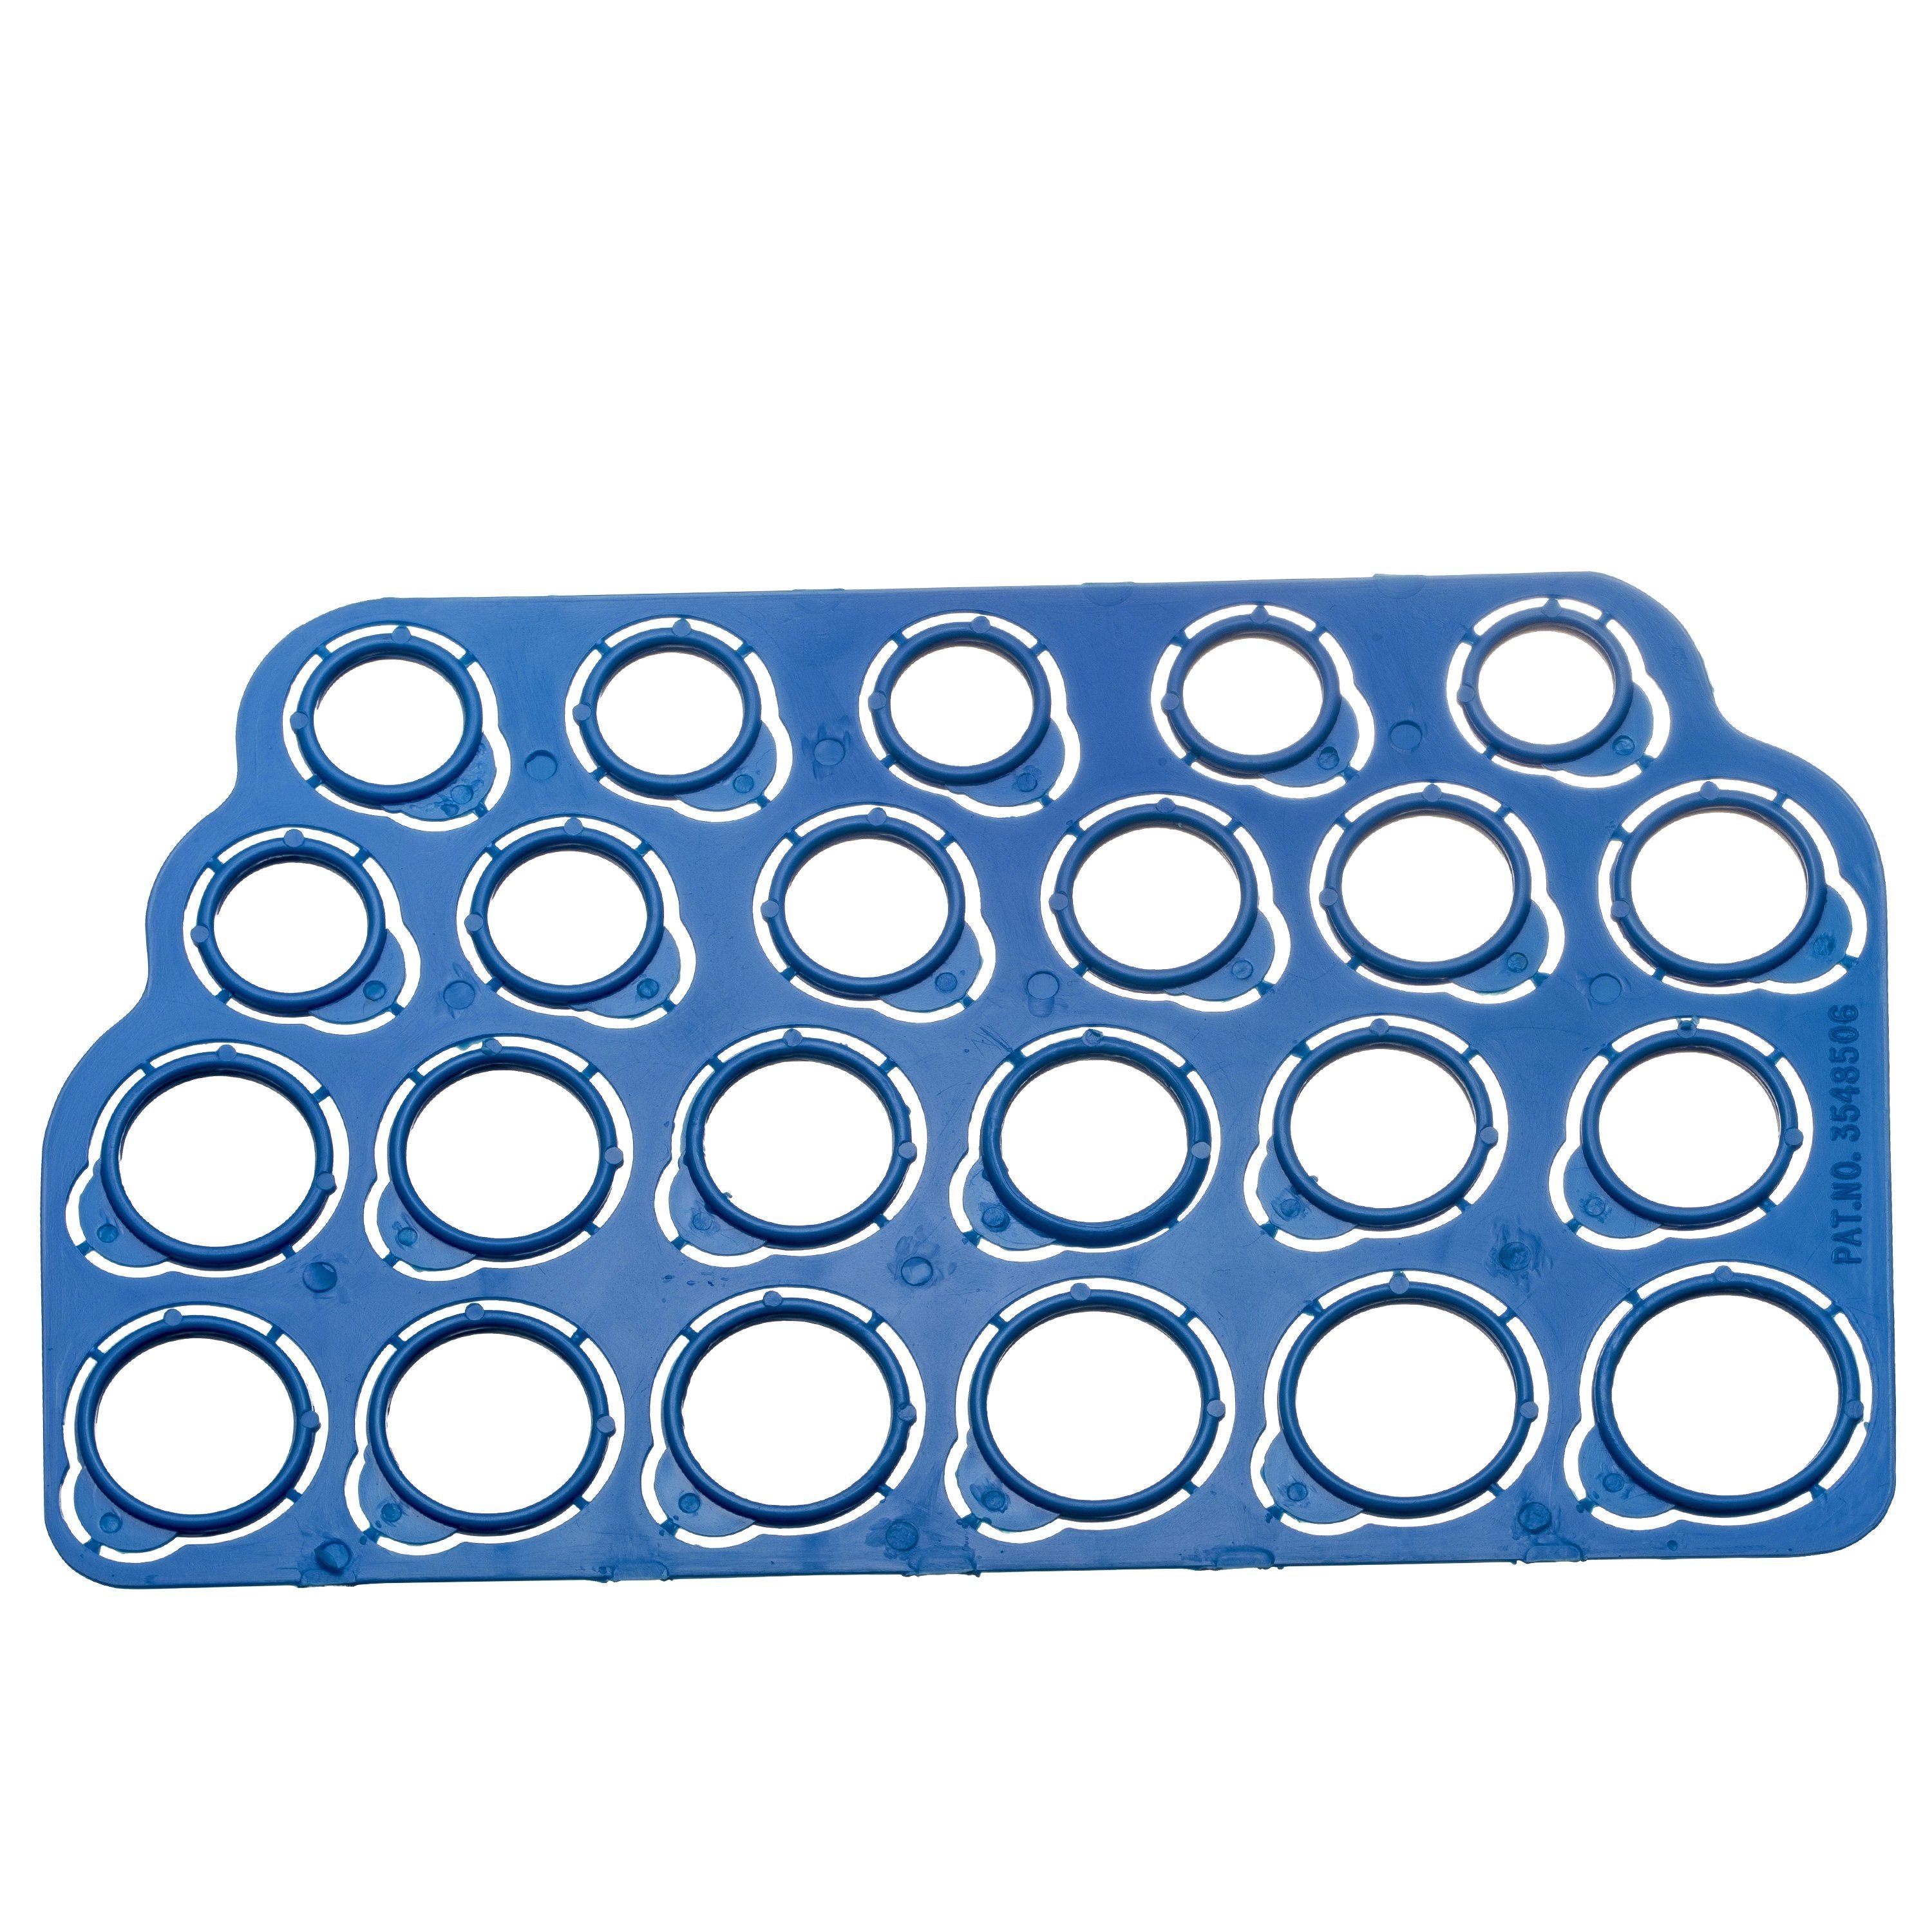 Pop Out Ring Sizer Pack of 12